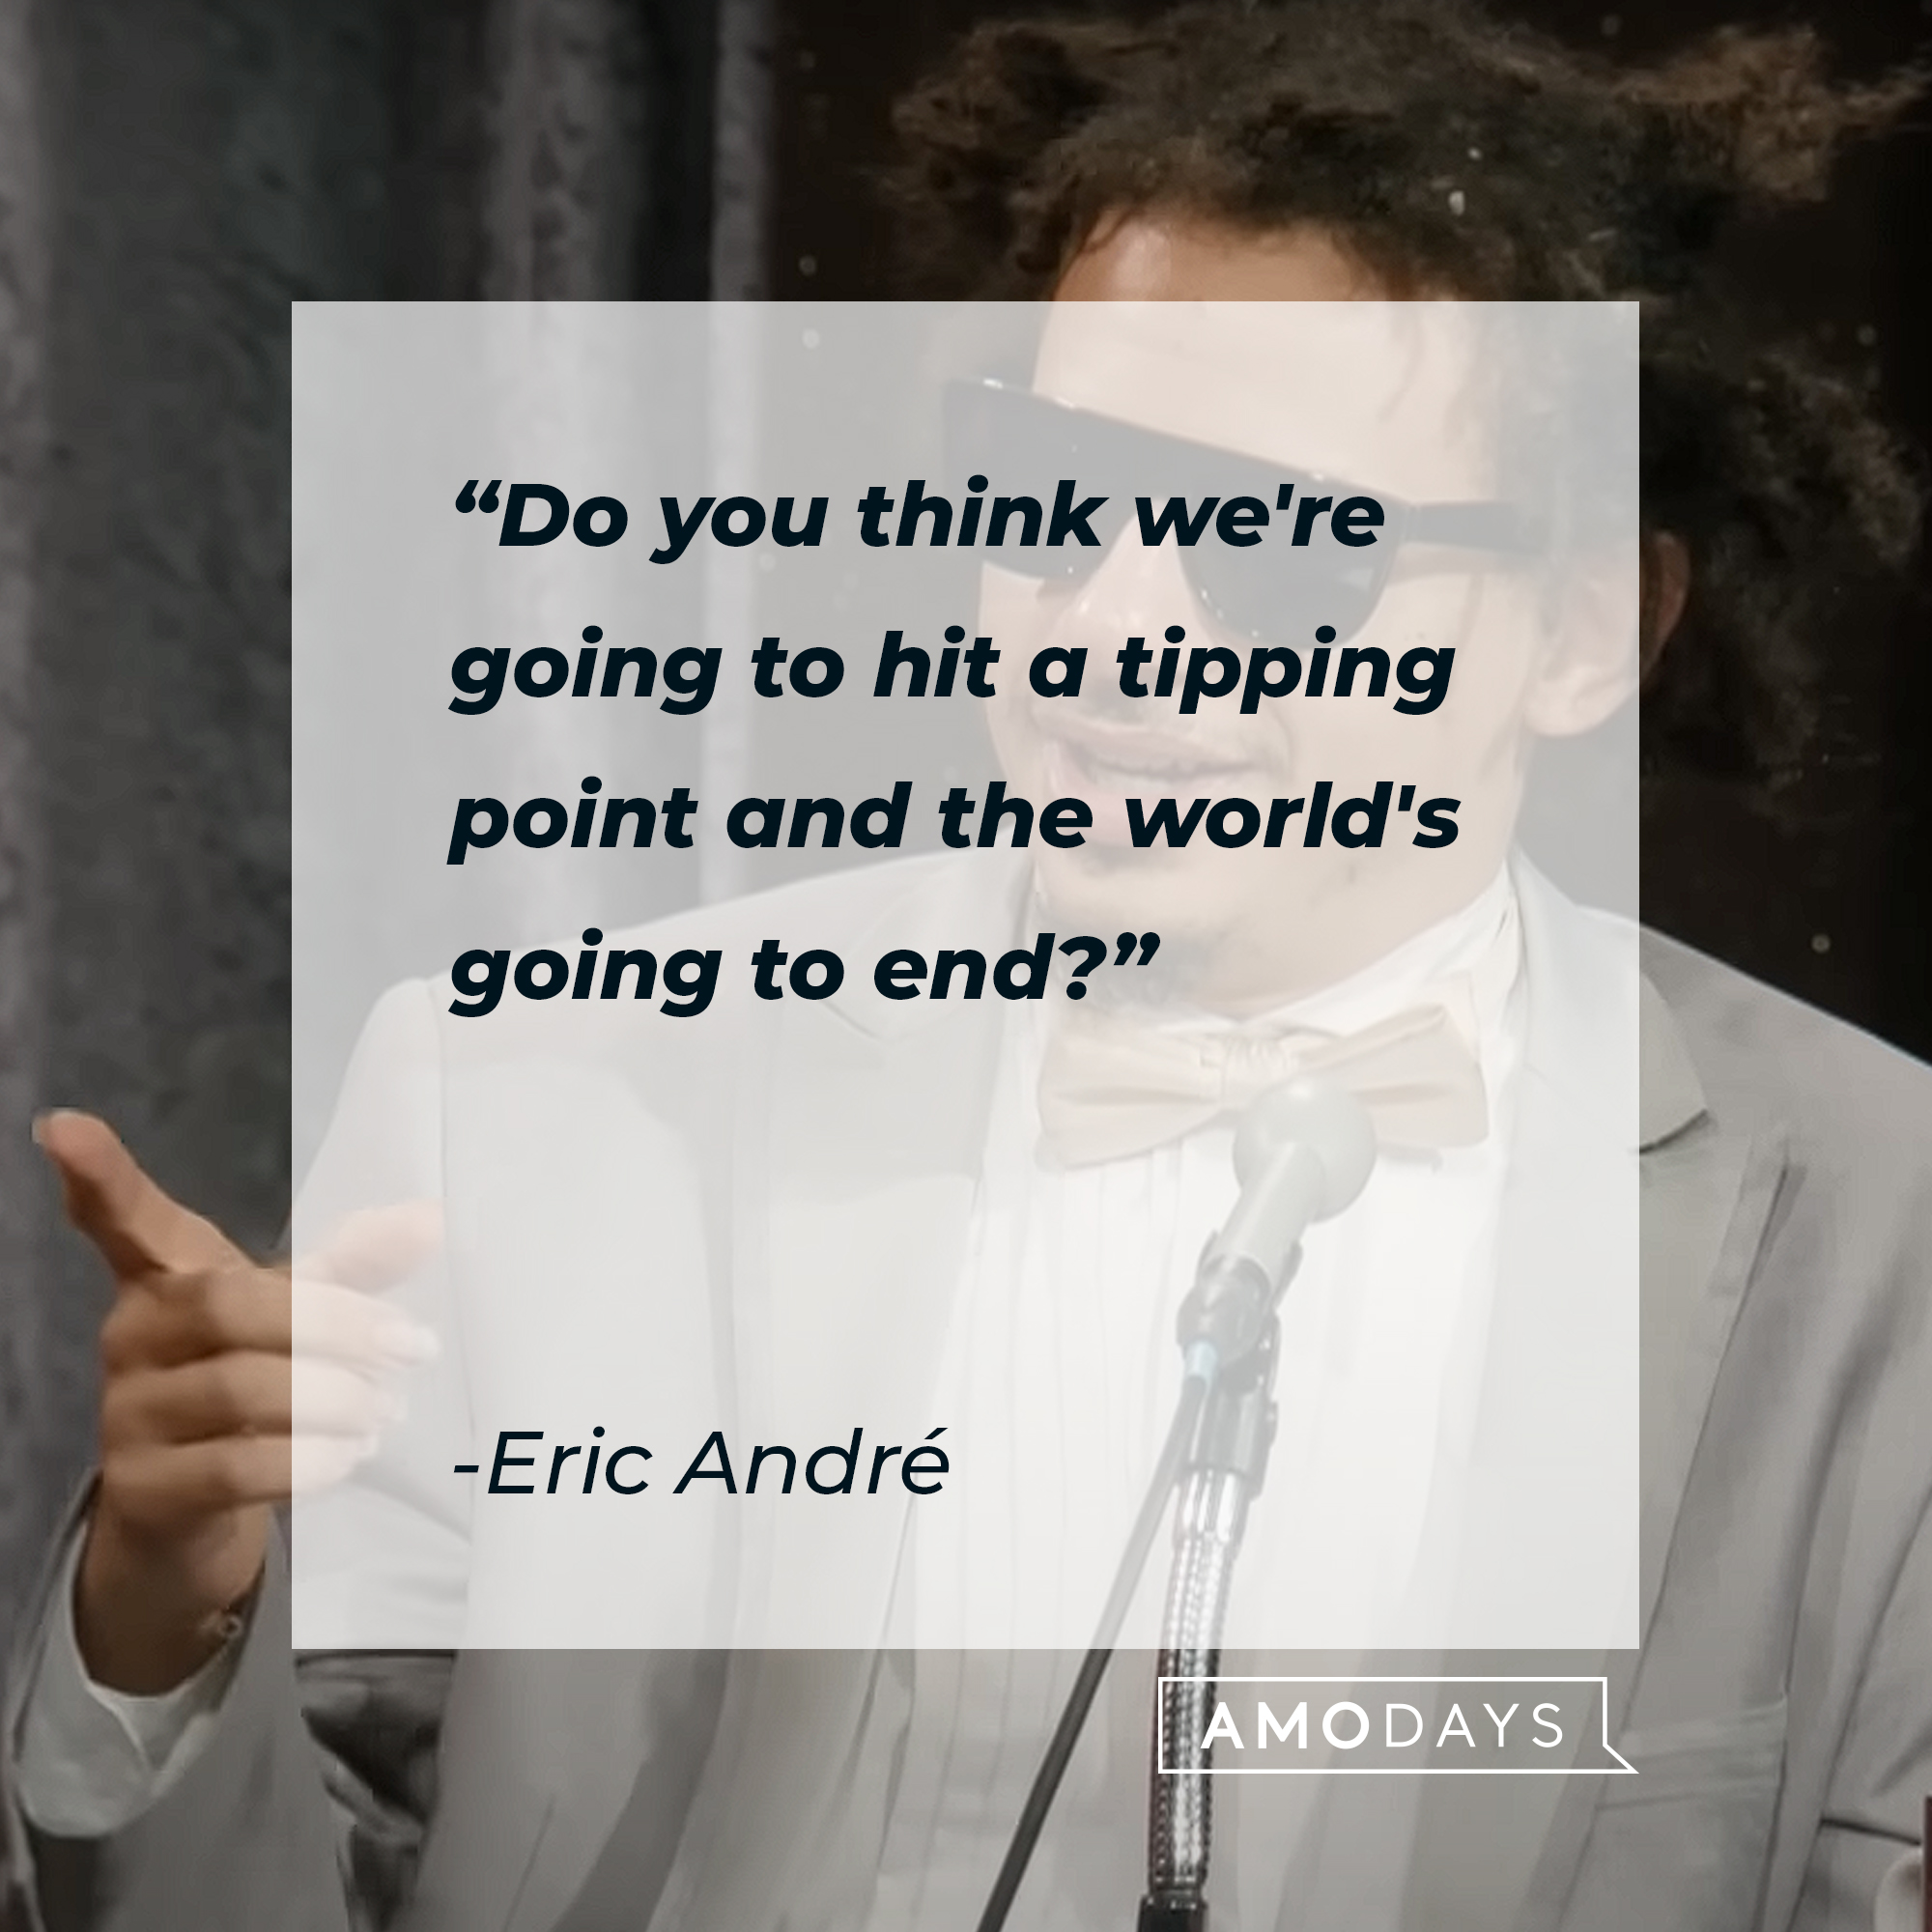 Eric André's quote: "Do you think we're going to hit a tipping point and the world's going to end?" | Source: Youtube.com/adultswim